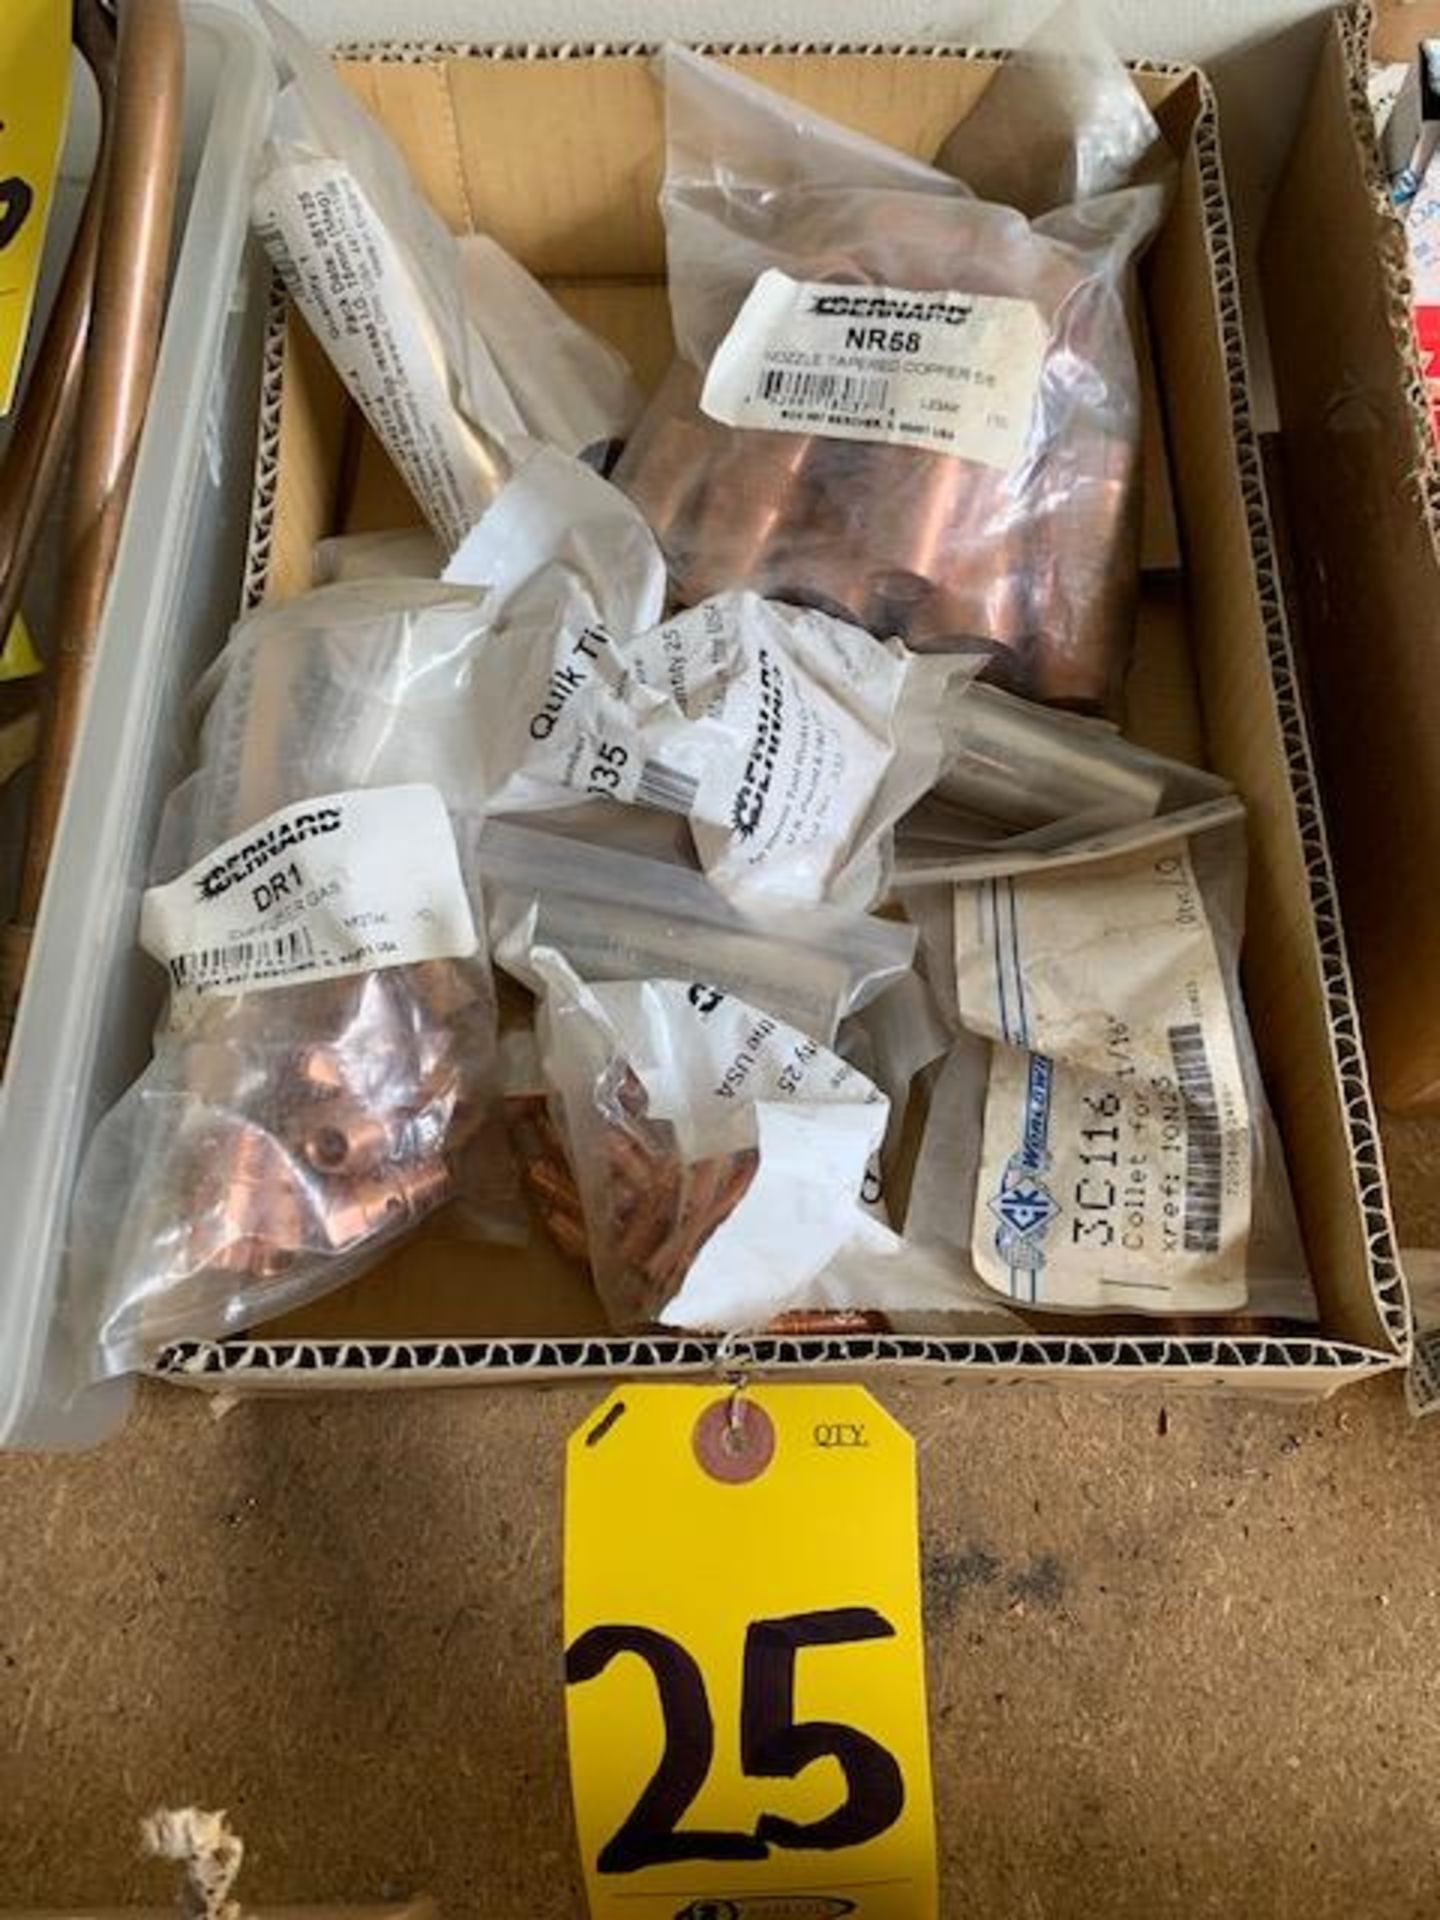 BERNARD COPPER NOZZLES, QUICK-TIPS, DEFUSER GAS FITTINGS AND ASSORTED TIPS